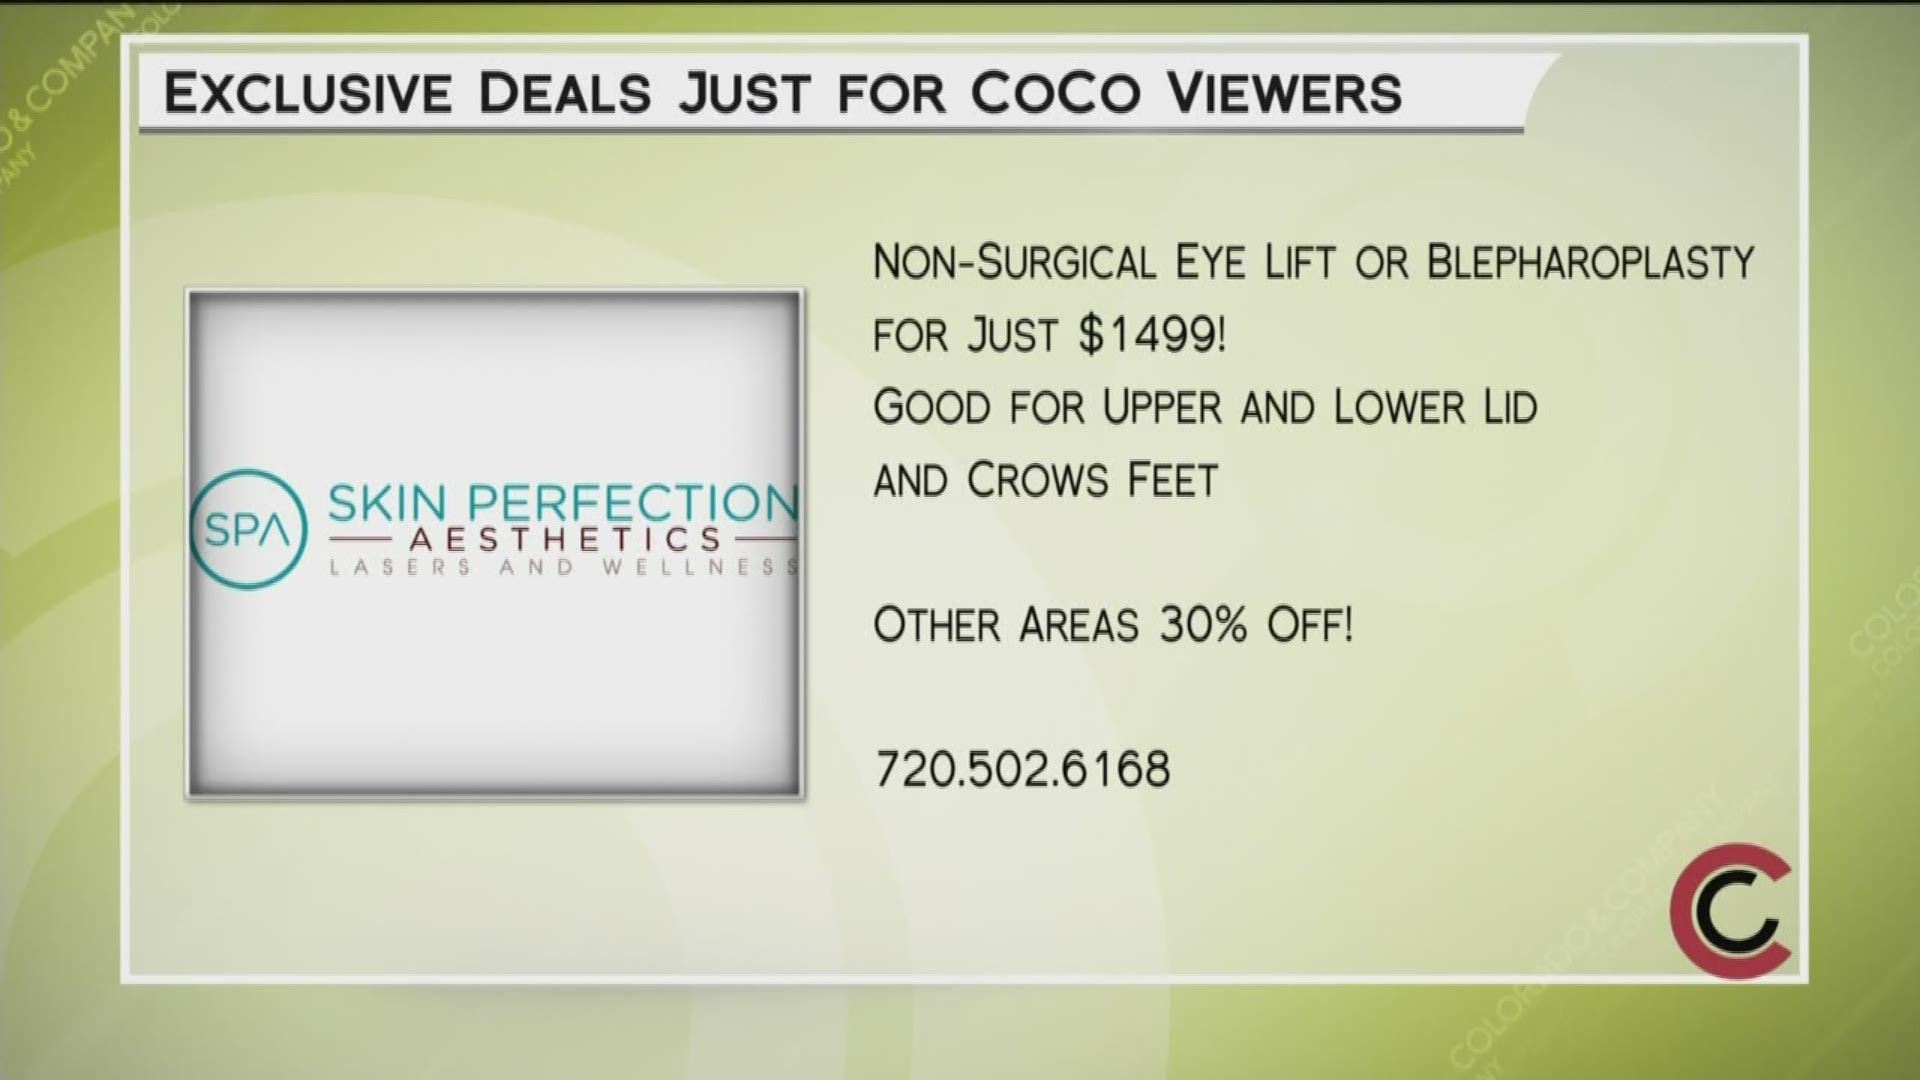 Get exclusive COCO holiday specials from Skin Perfection Aesthetics. Learn how they can help you look your best at www.SkinPerfectionMedSpa.com or call 720.502.6168.